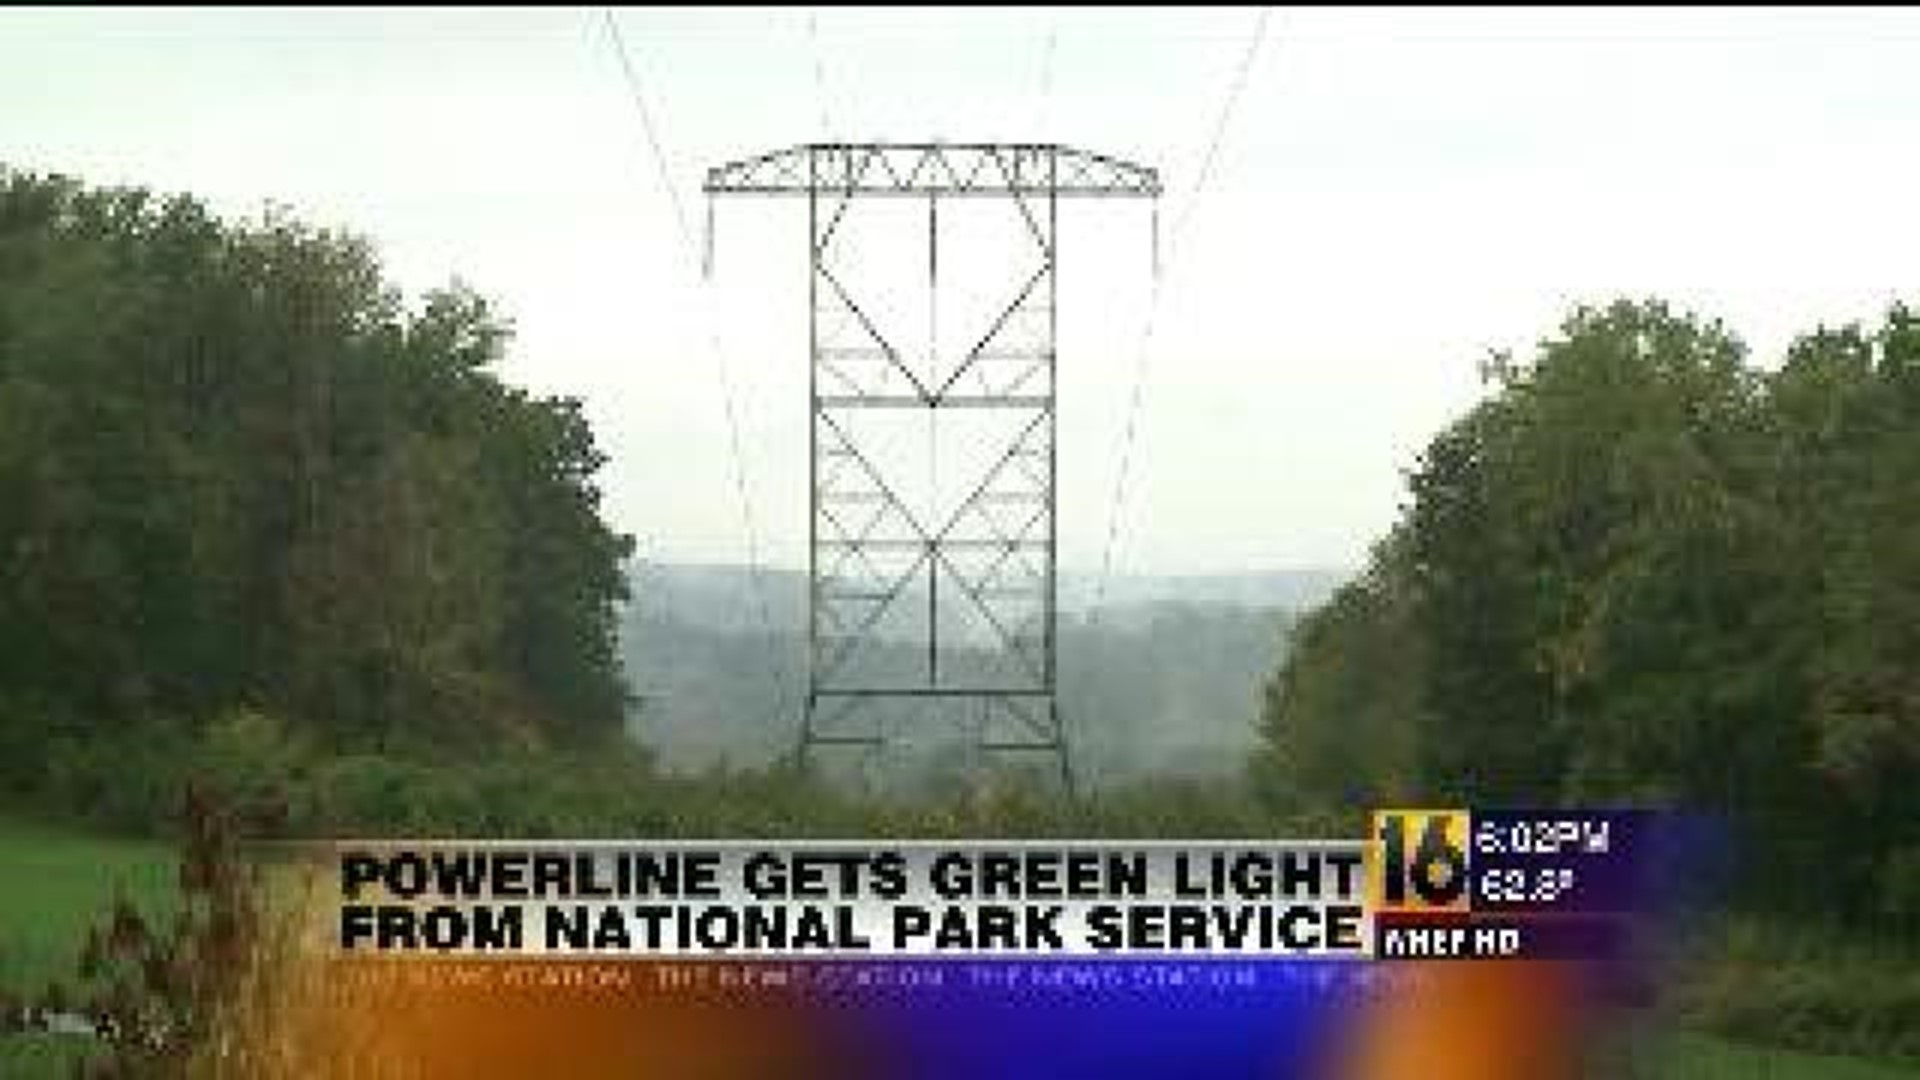 Powerline Gets Green Light From the National Park Service